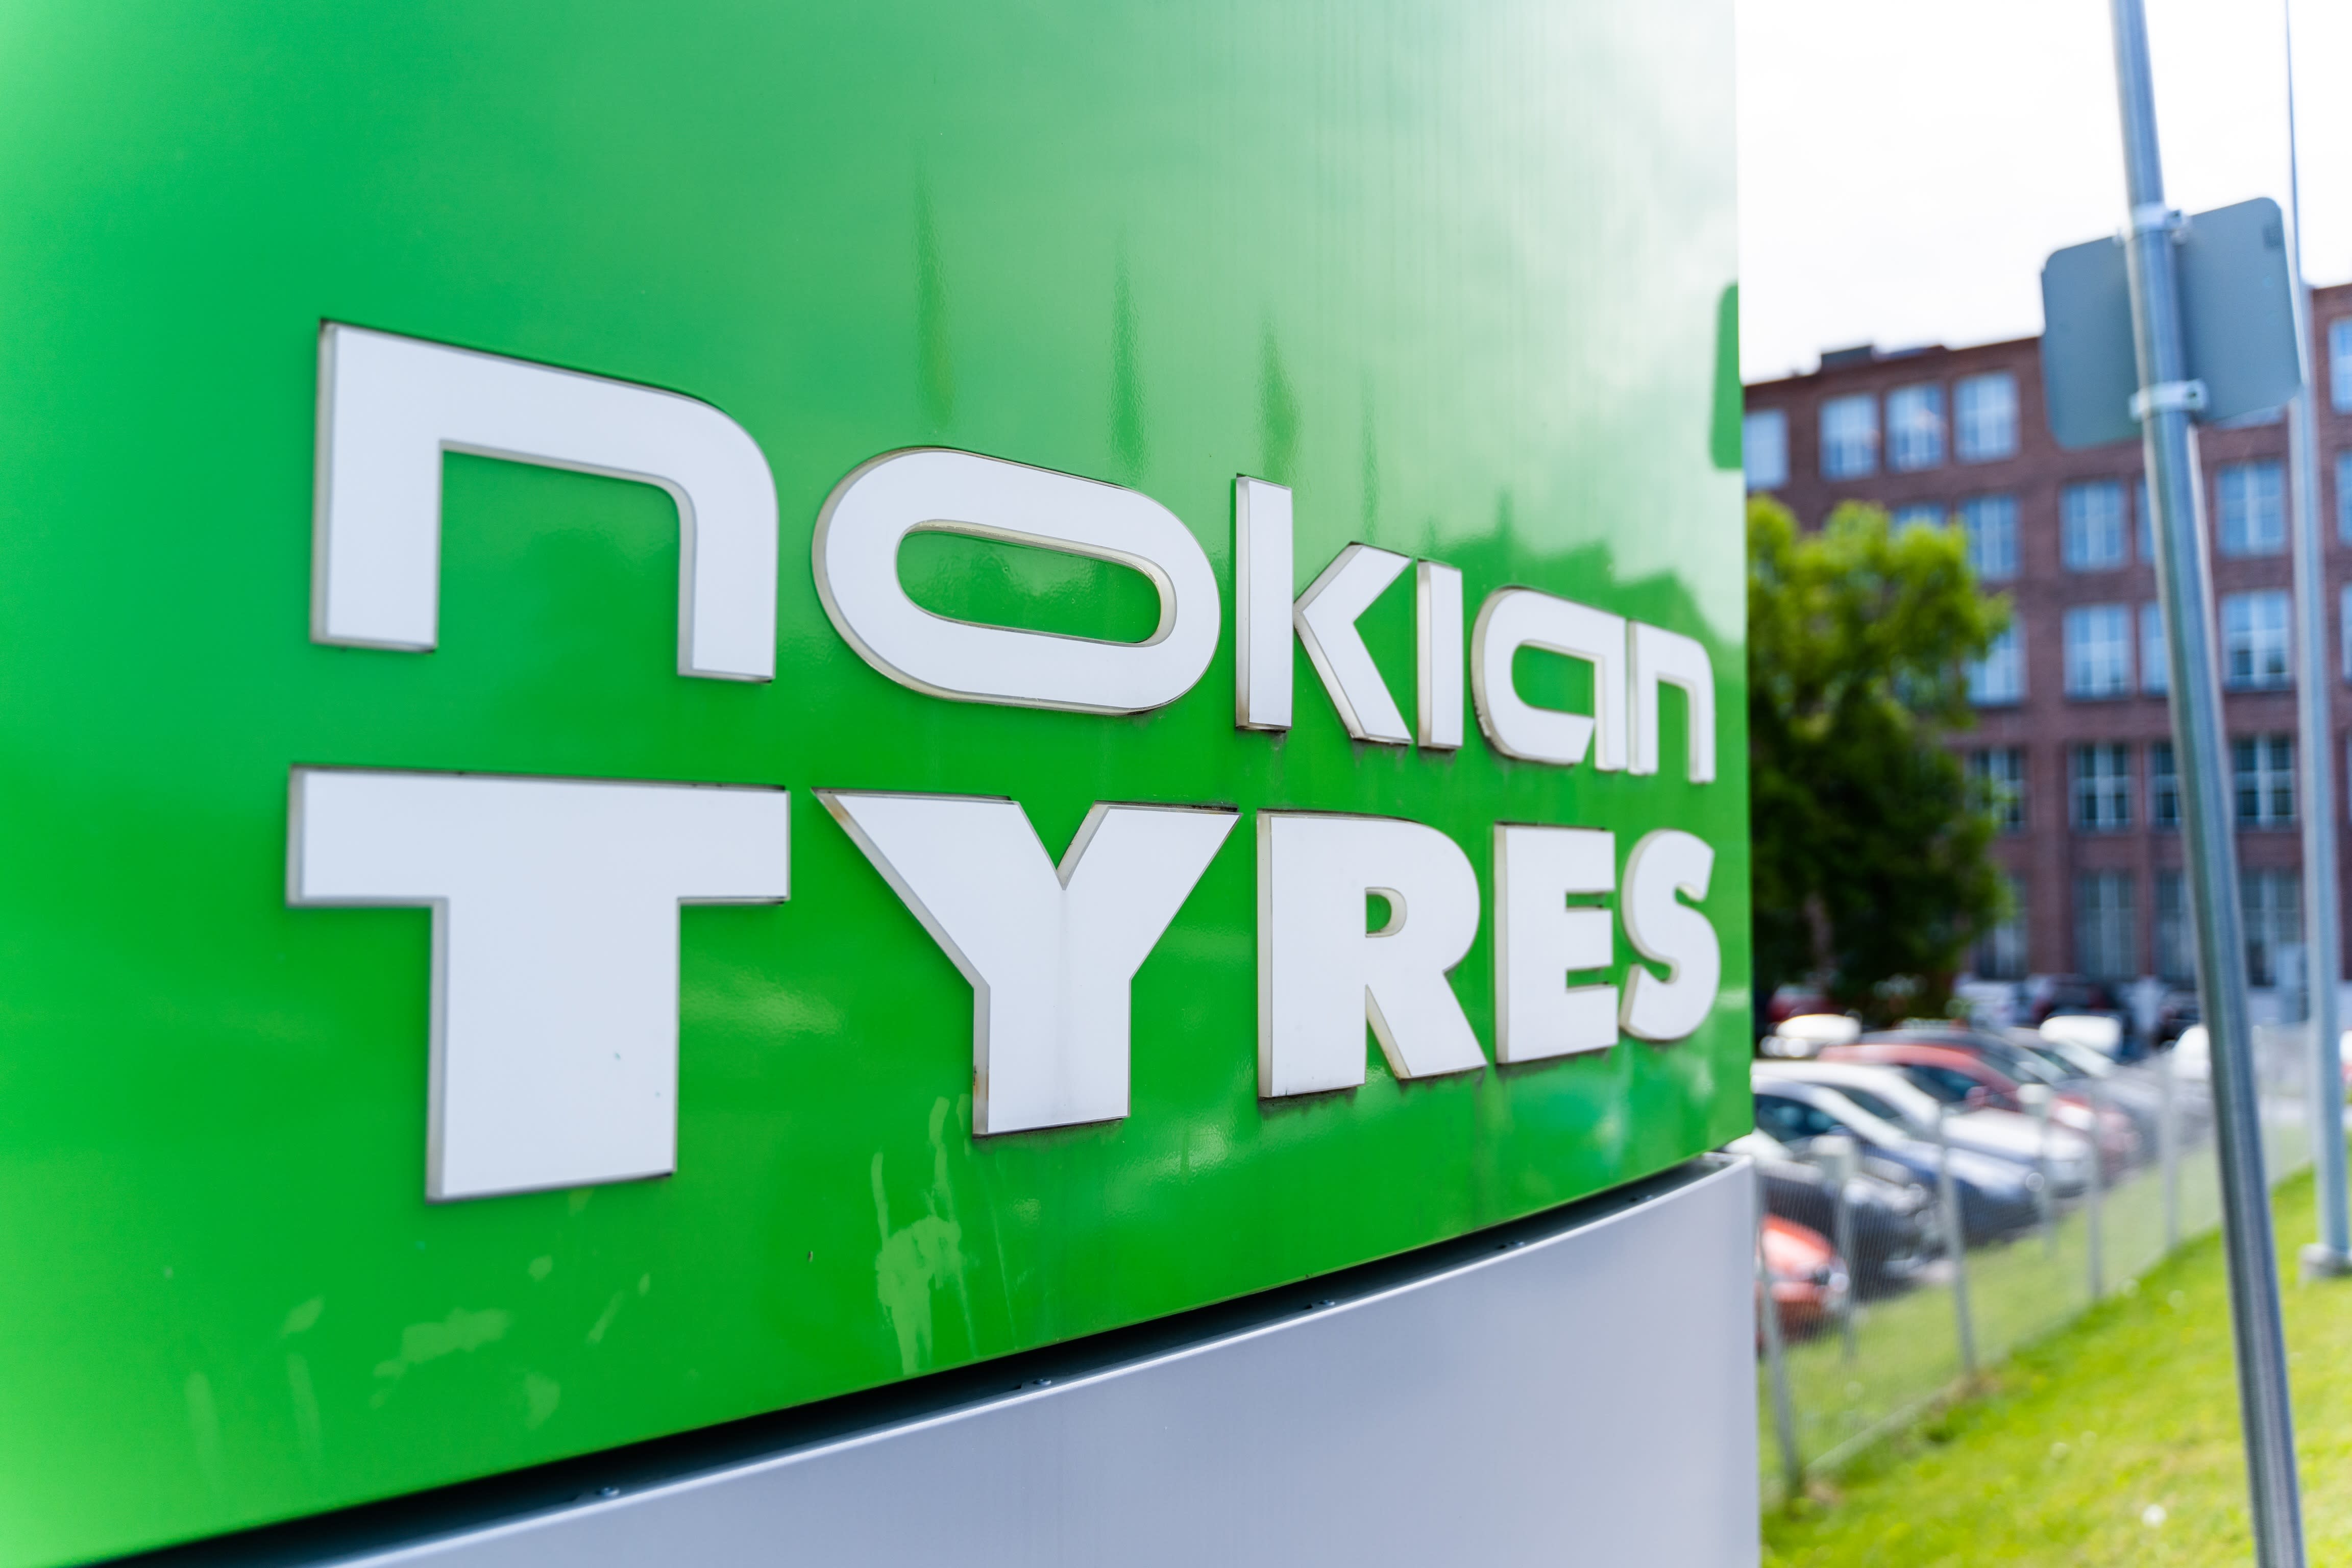 The court acquitted the defendants in Nokian Tires’ insider trading case